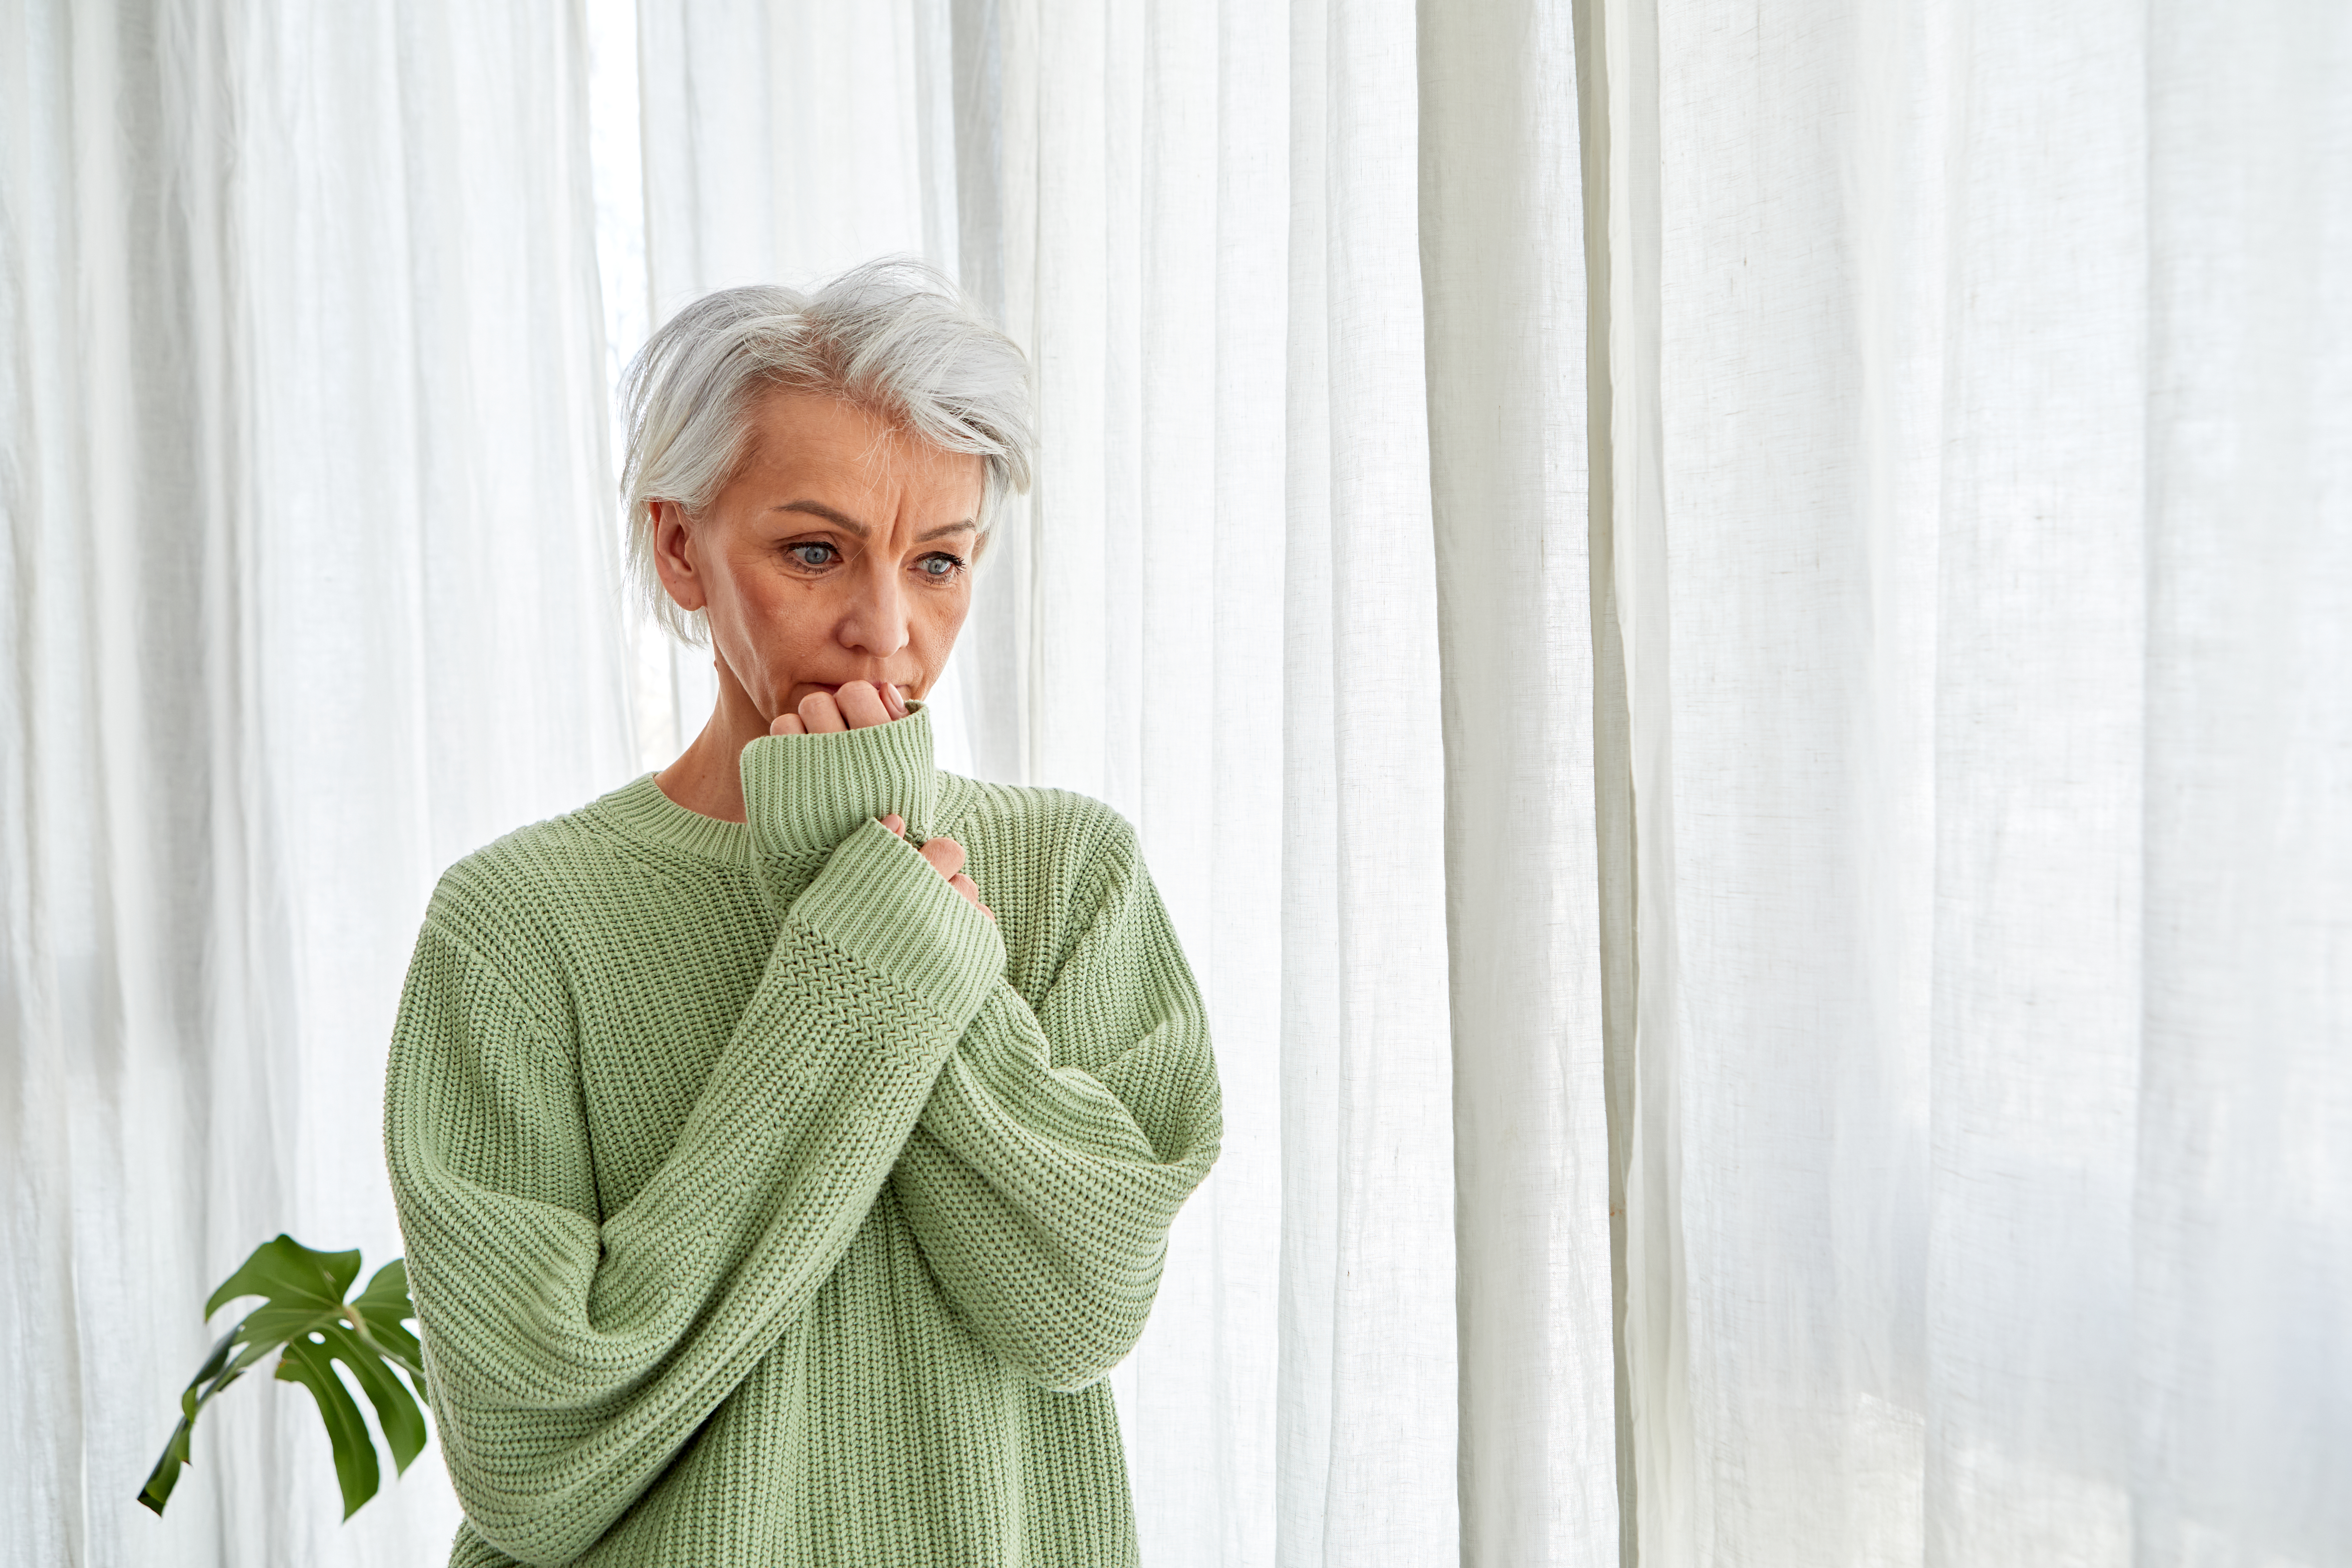 Woman with gray hair nervously bites her nails at the window | Source: Getty Images